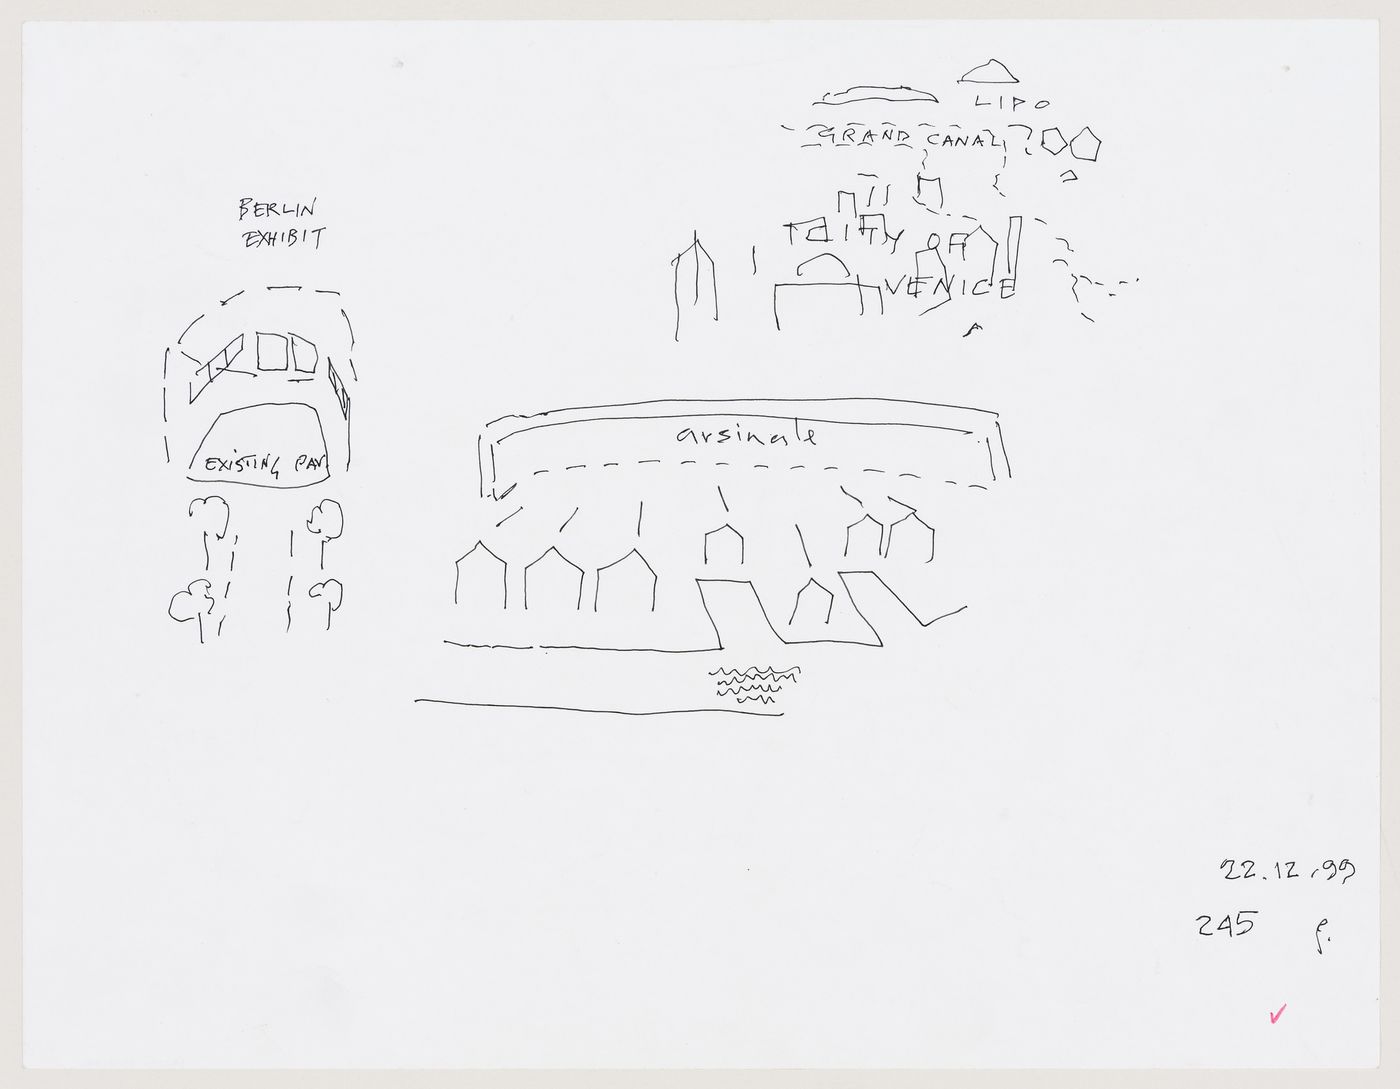 Venice: sketches of the Berlin Exhibit, Arsenale, Lido and Grand Canal